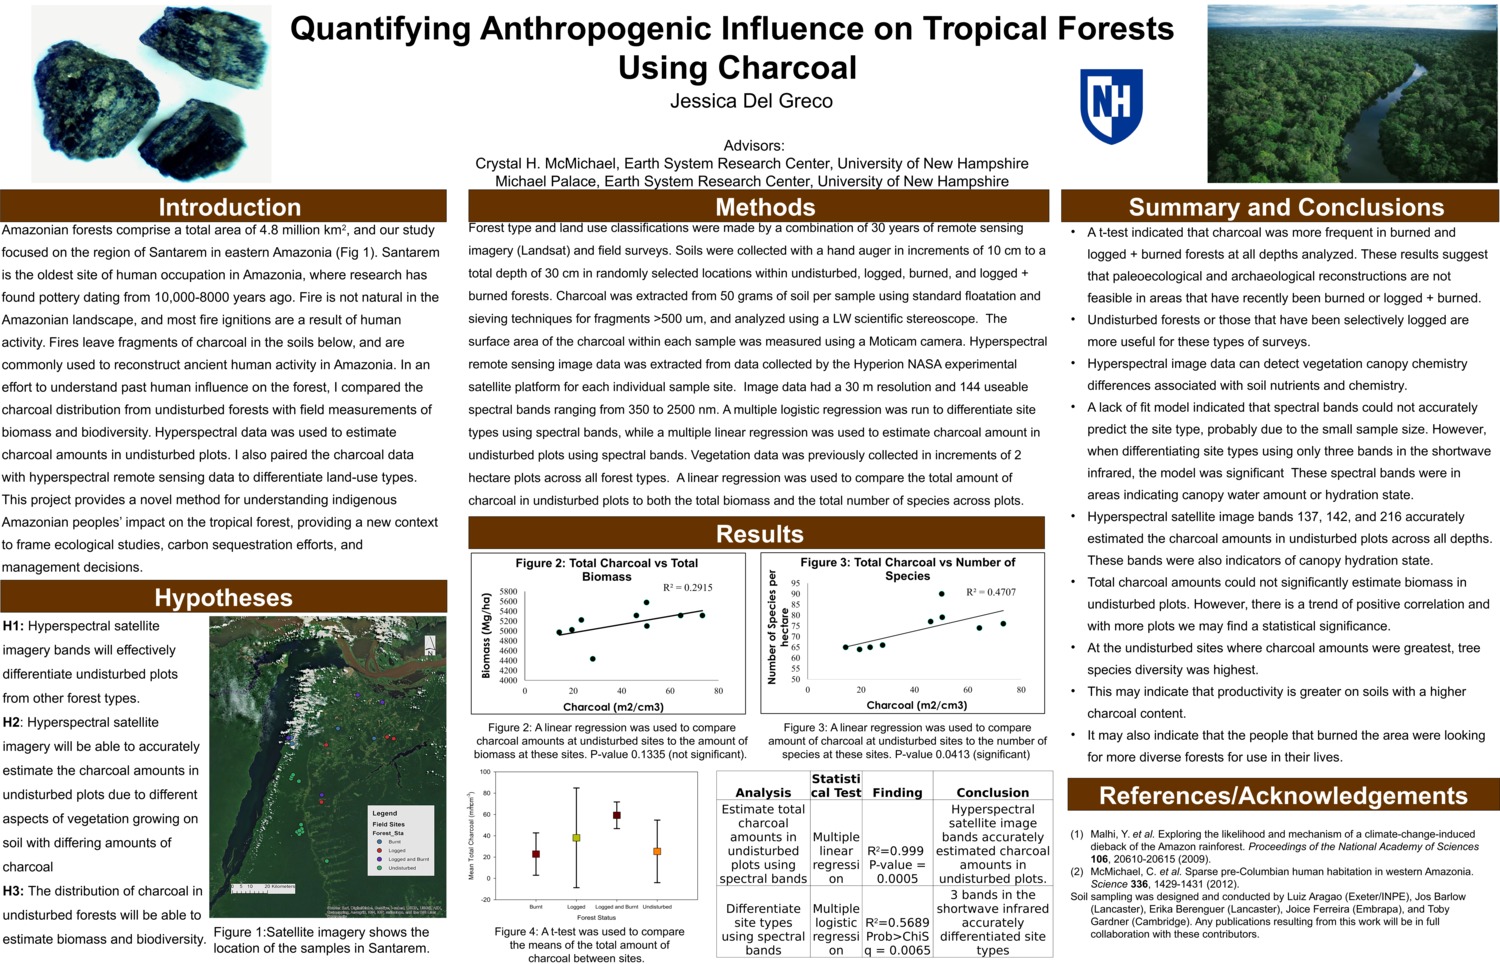 Quantifying Anthropogenic Influence On Tropical Forests Using Charcoal by herrick